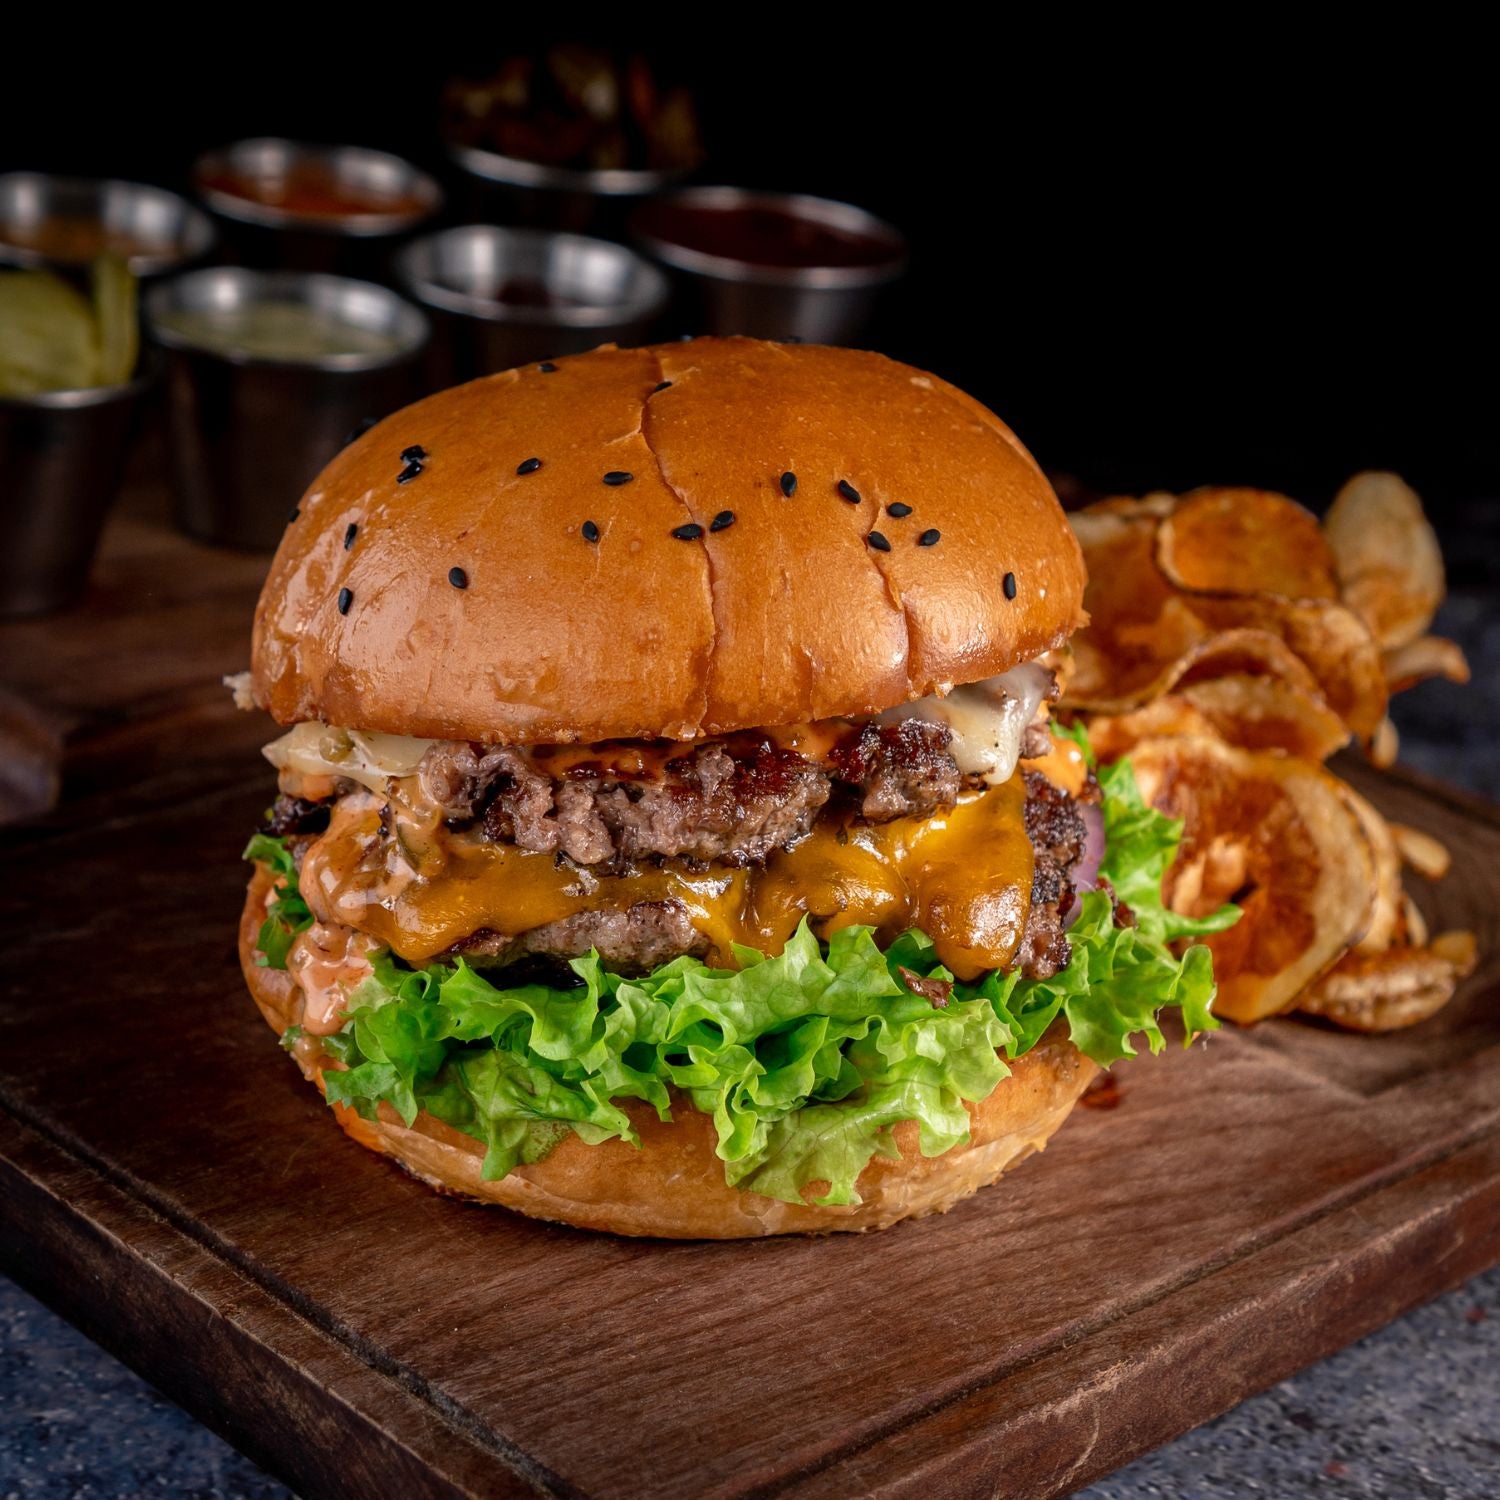 A juicy and delicious classic beef burger